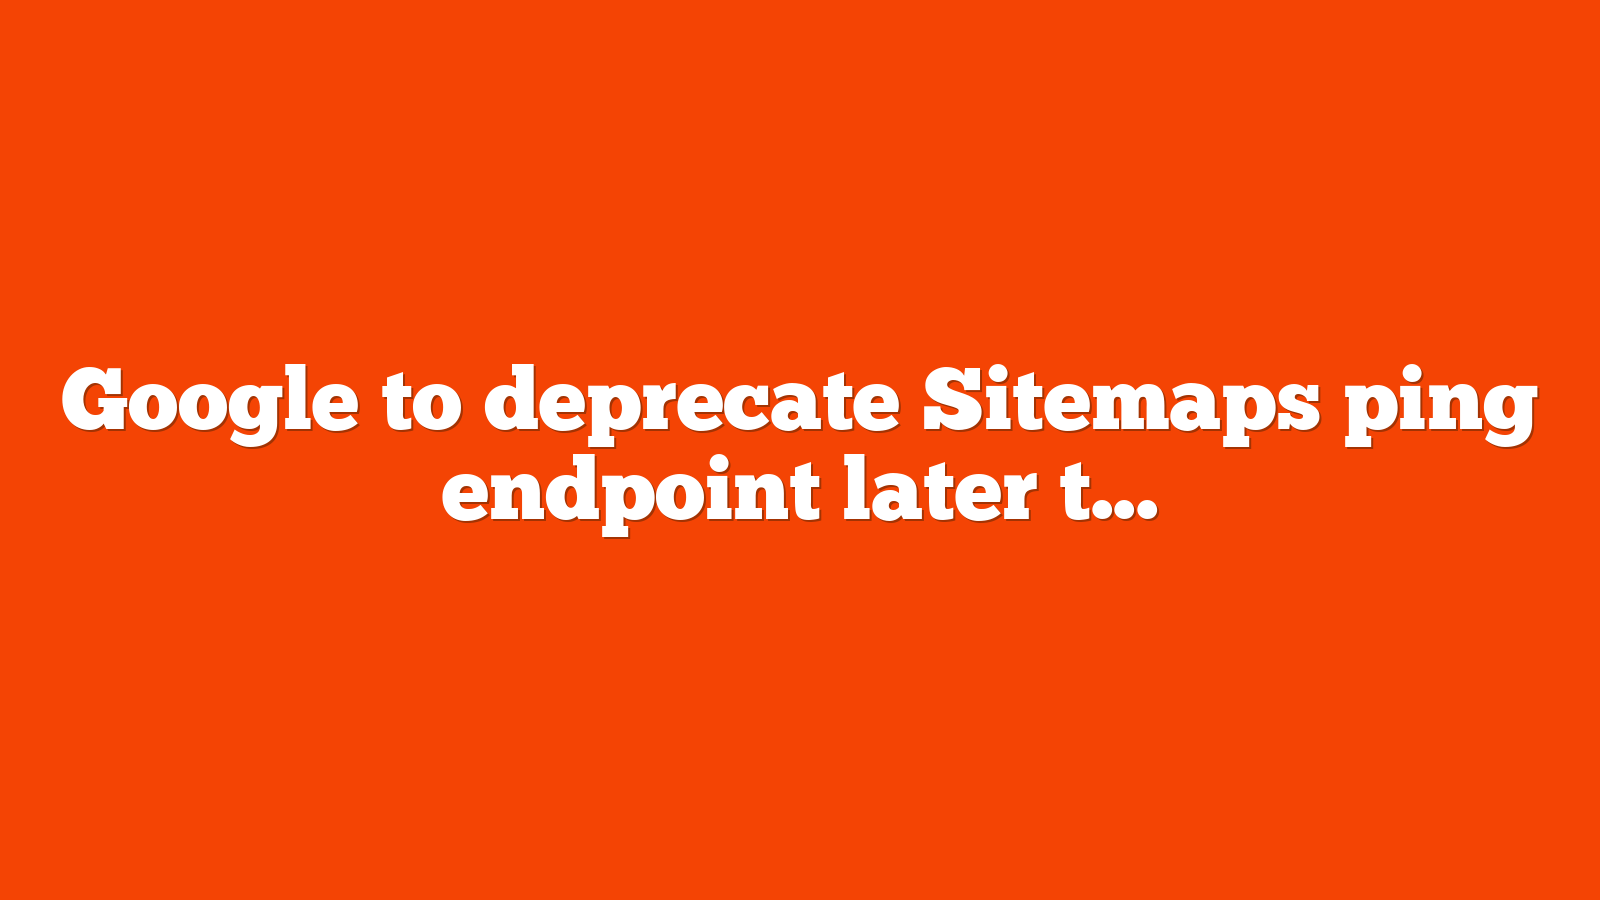 Google to deprecate Sitemaps ping endpoint later this year